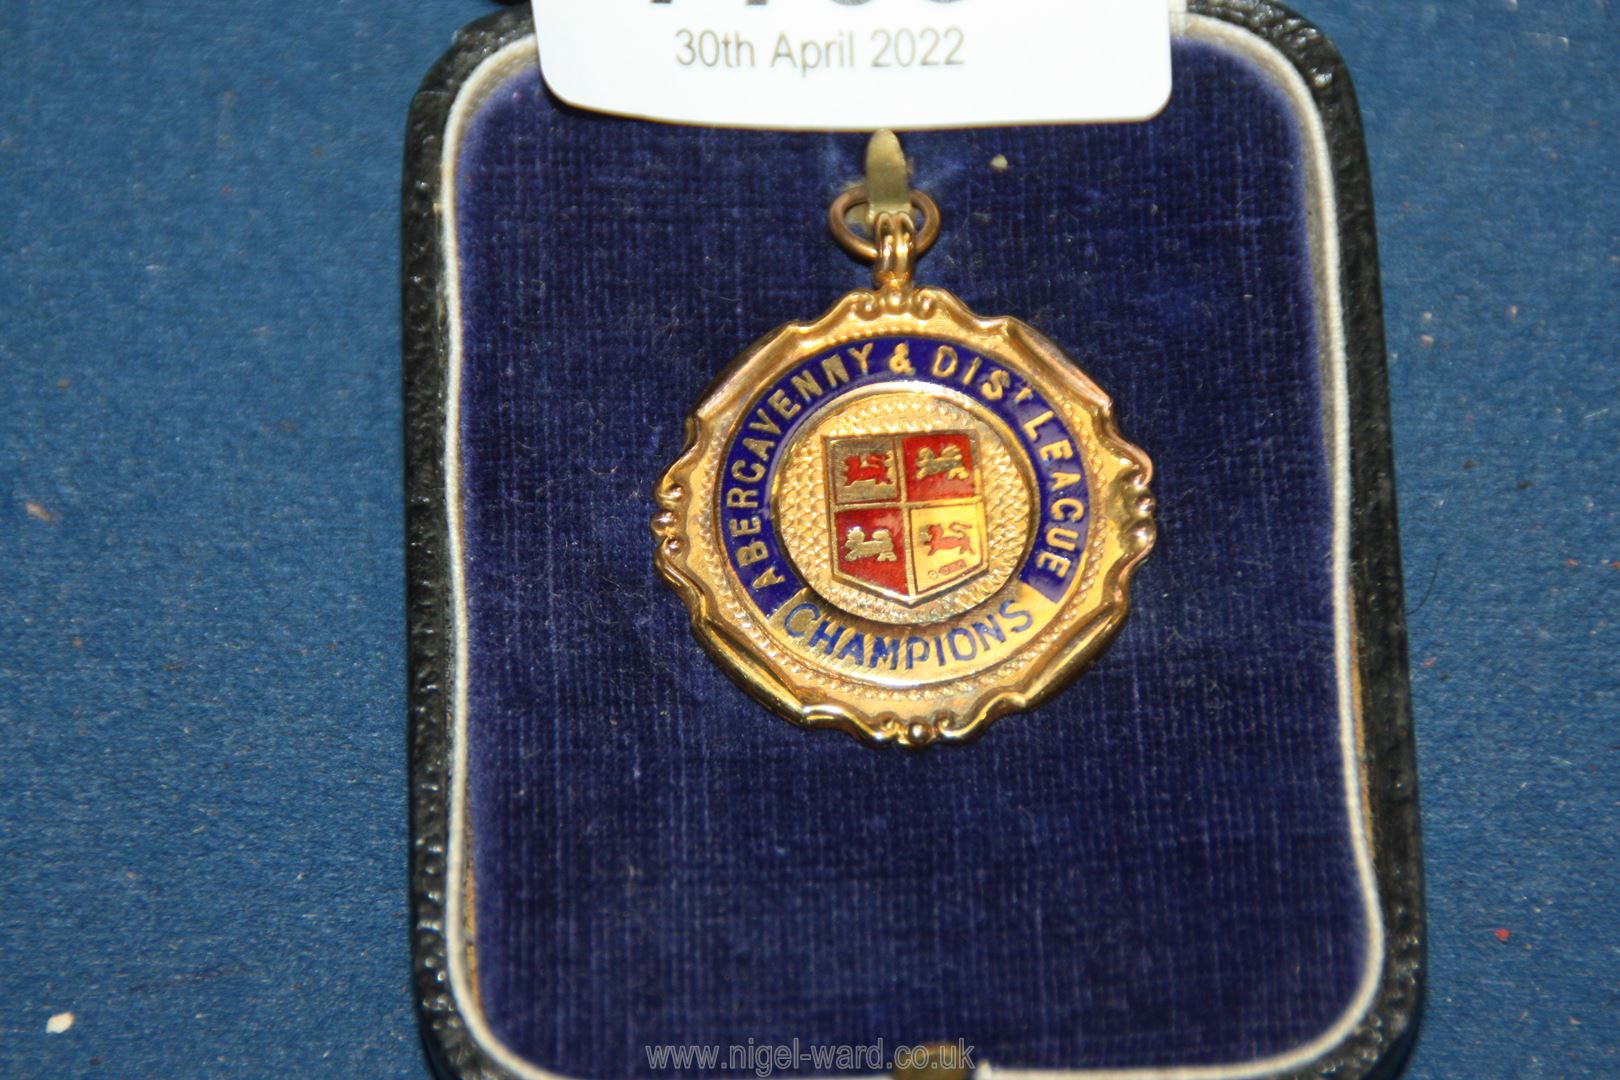 A 9ct gold and enamel 'Abergavenny League Champions 1923-24' Medal in blue and red to the crest and - Image 2 of 3